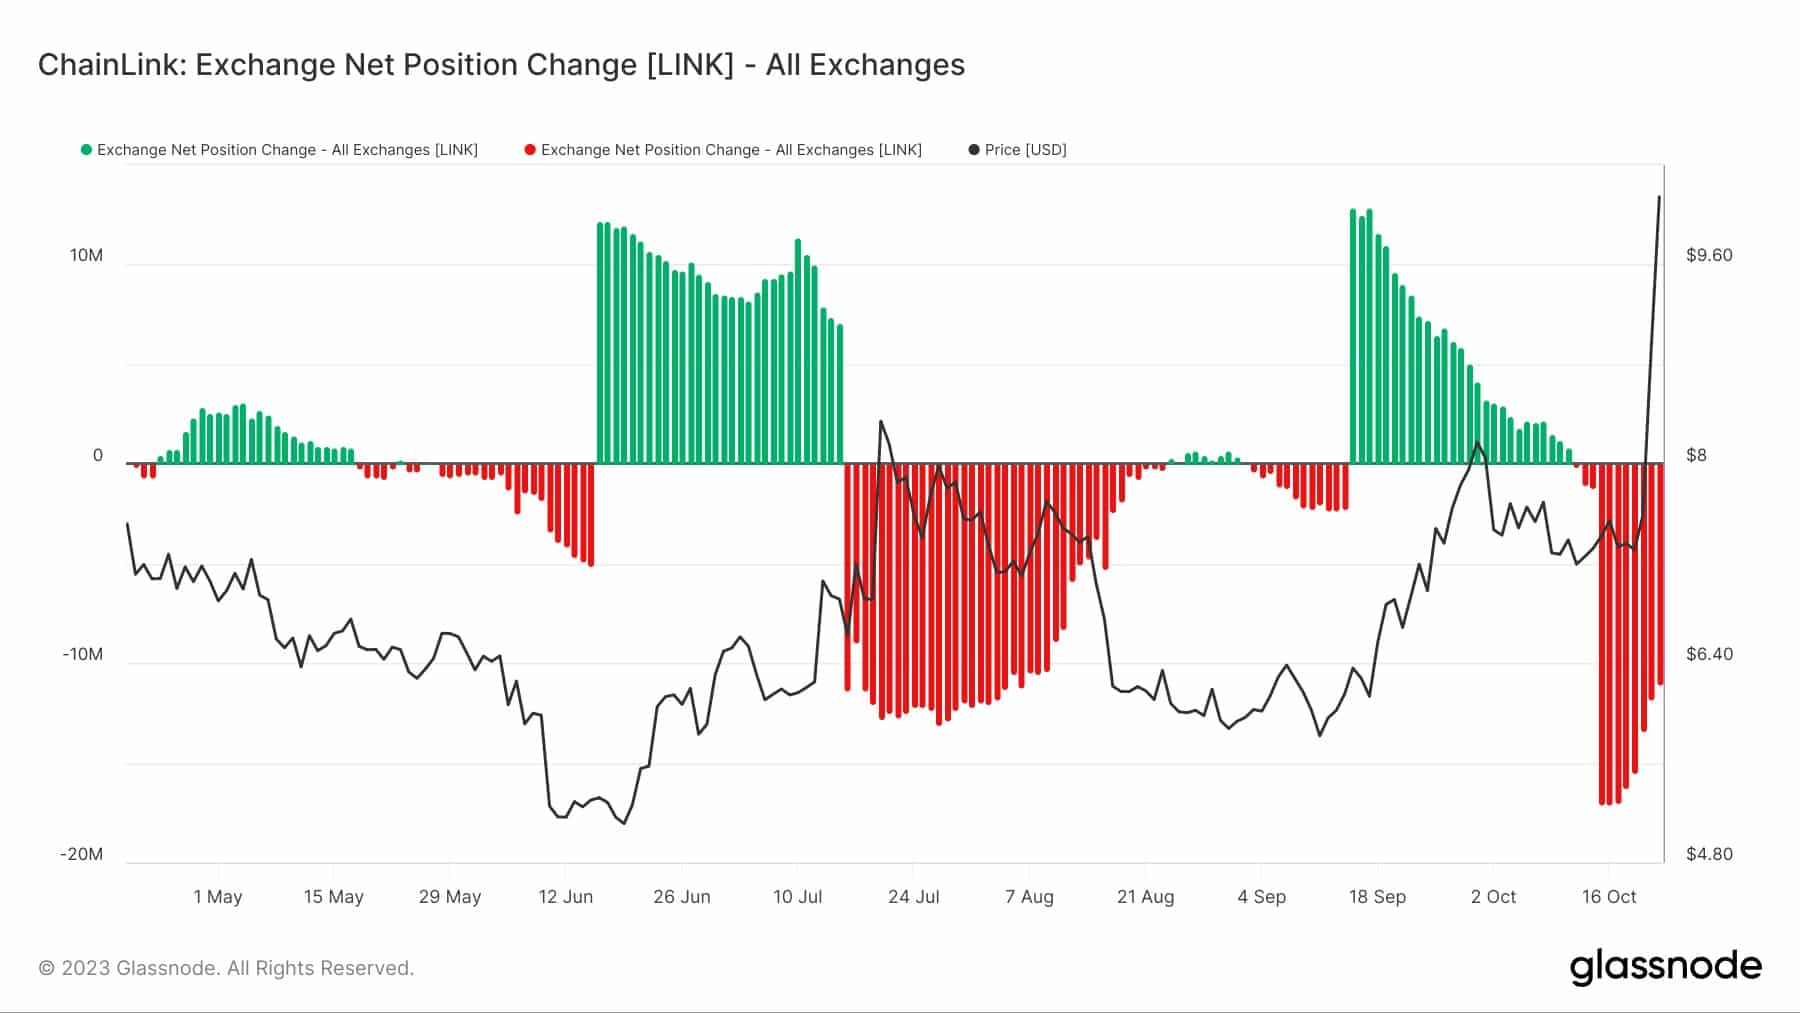 LINK net inflows and outflows on exchanges over past 6 months